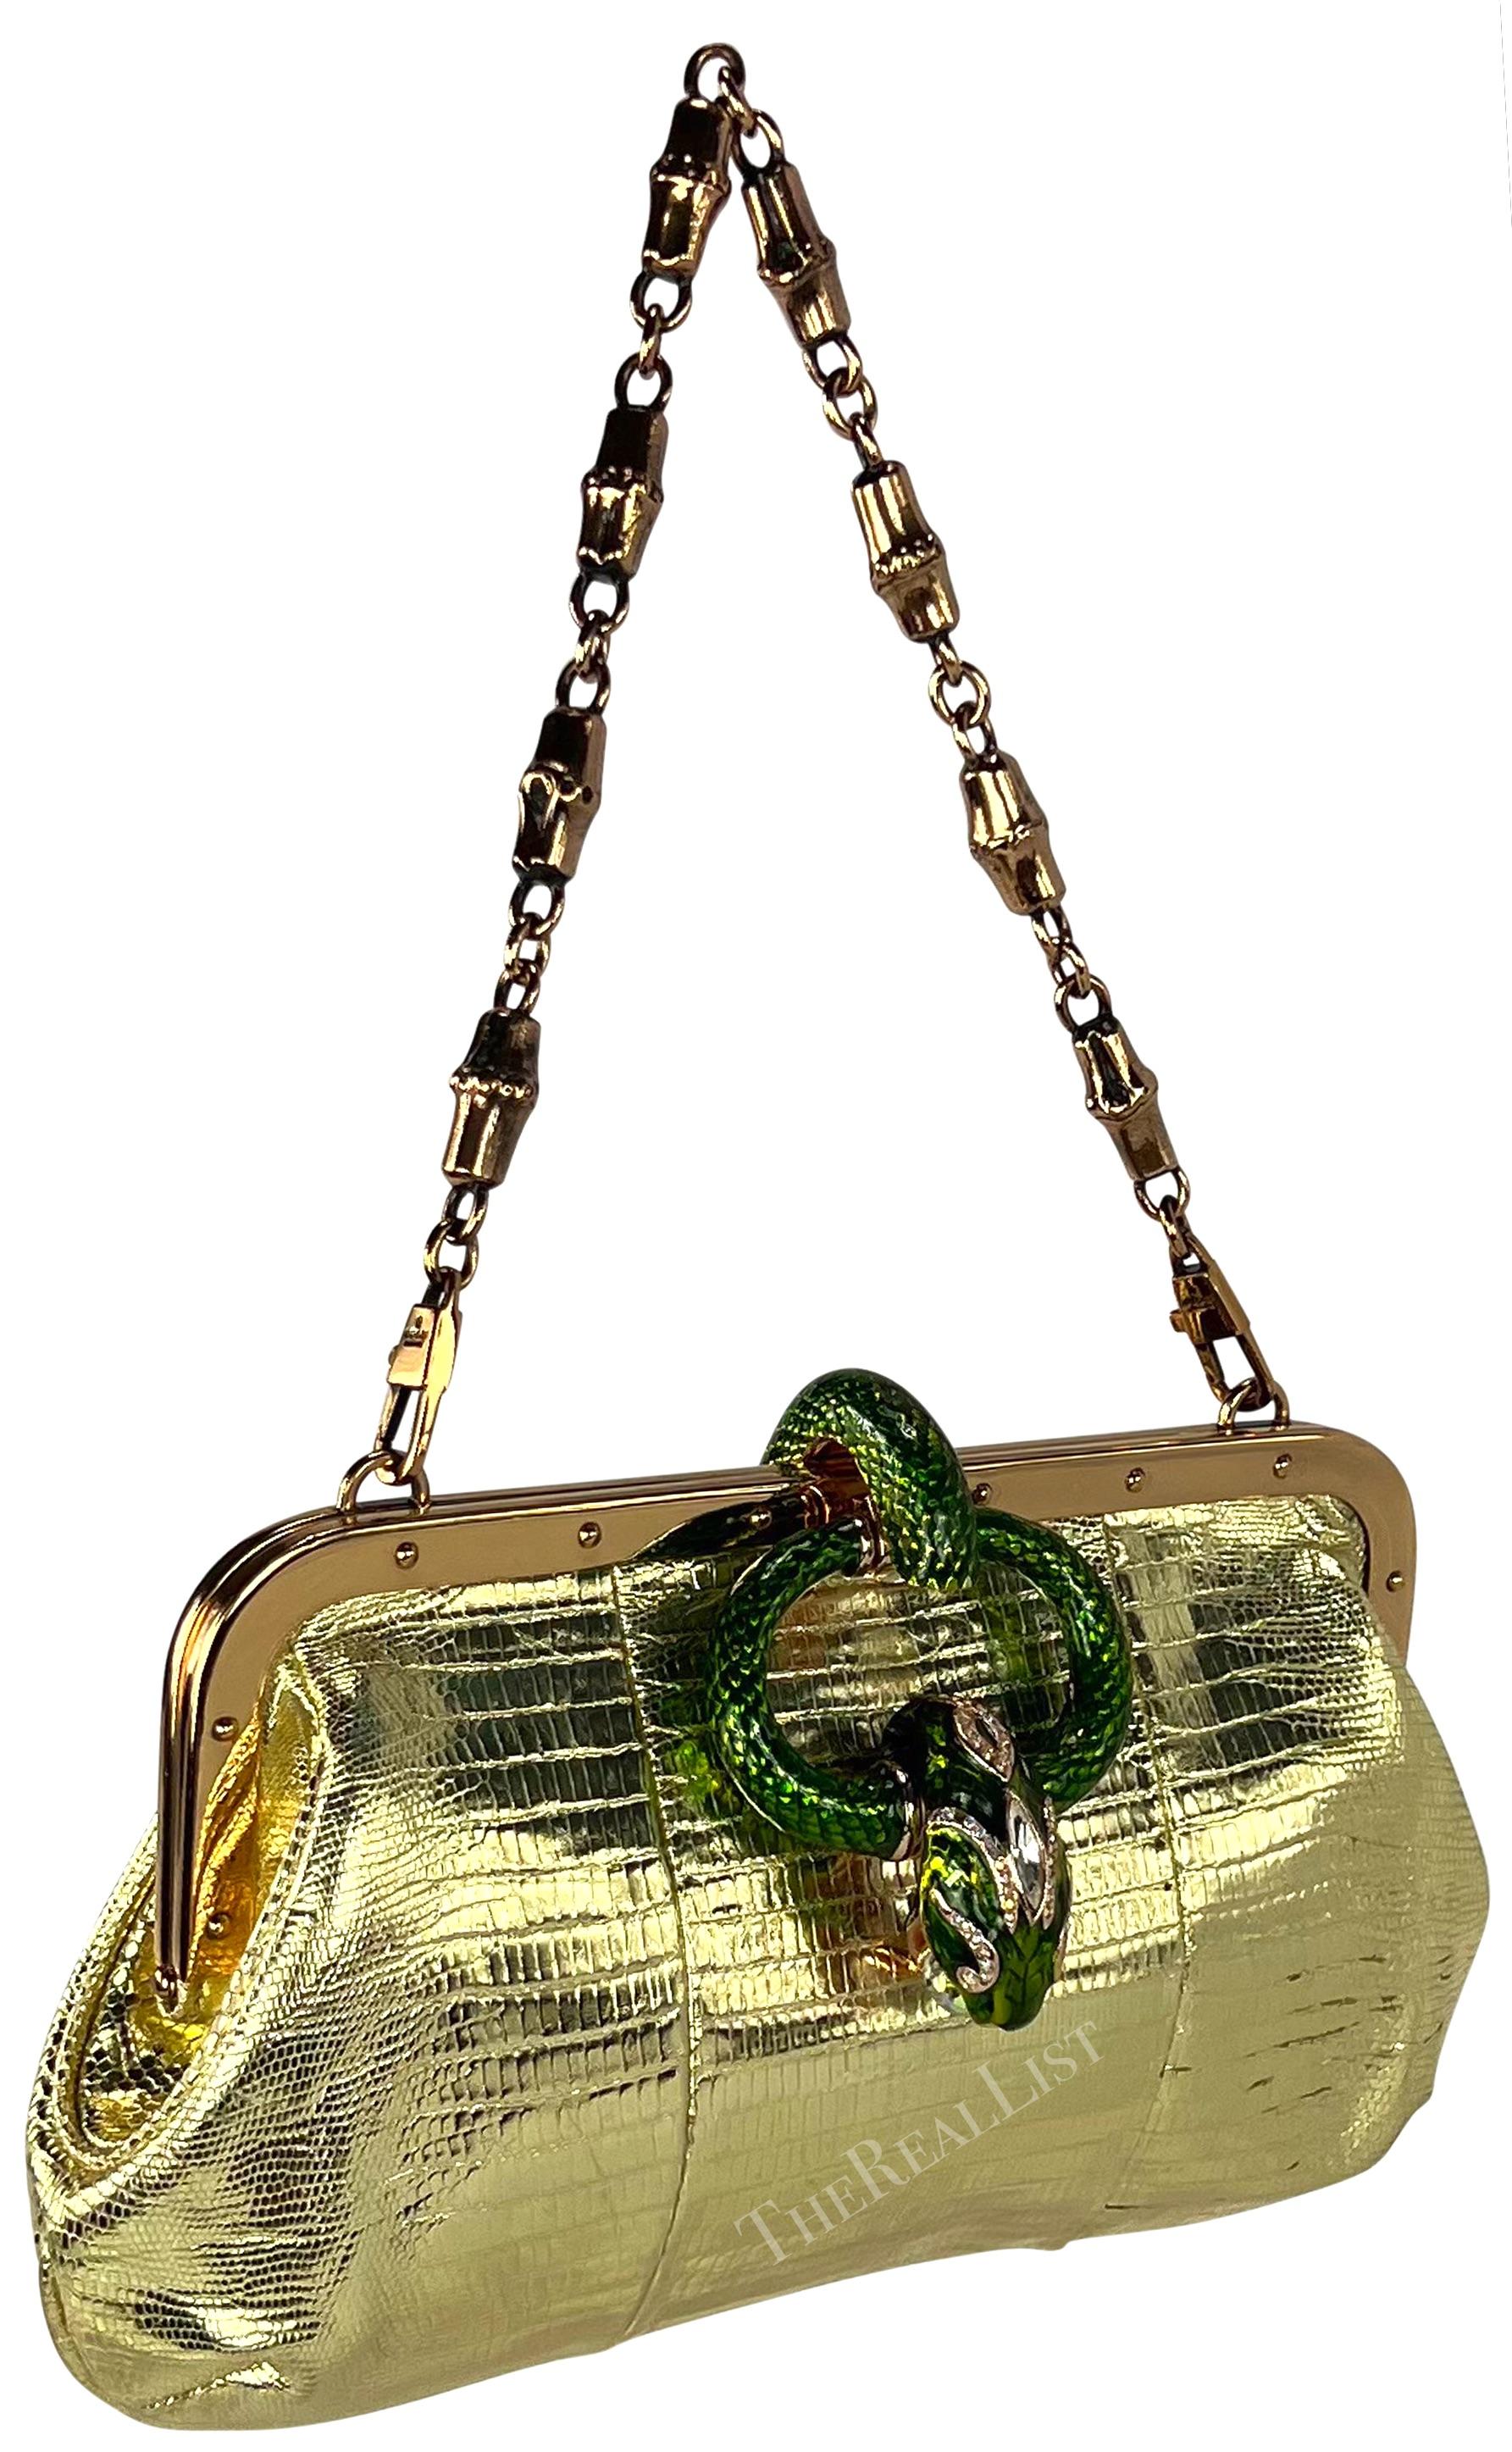 S/S 2004 Gucci by Tom Ford Runway Gold Lizard Skin Snake Convertible Bag  10